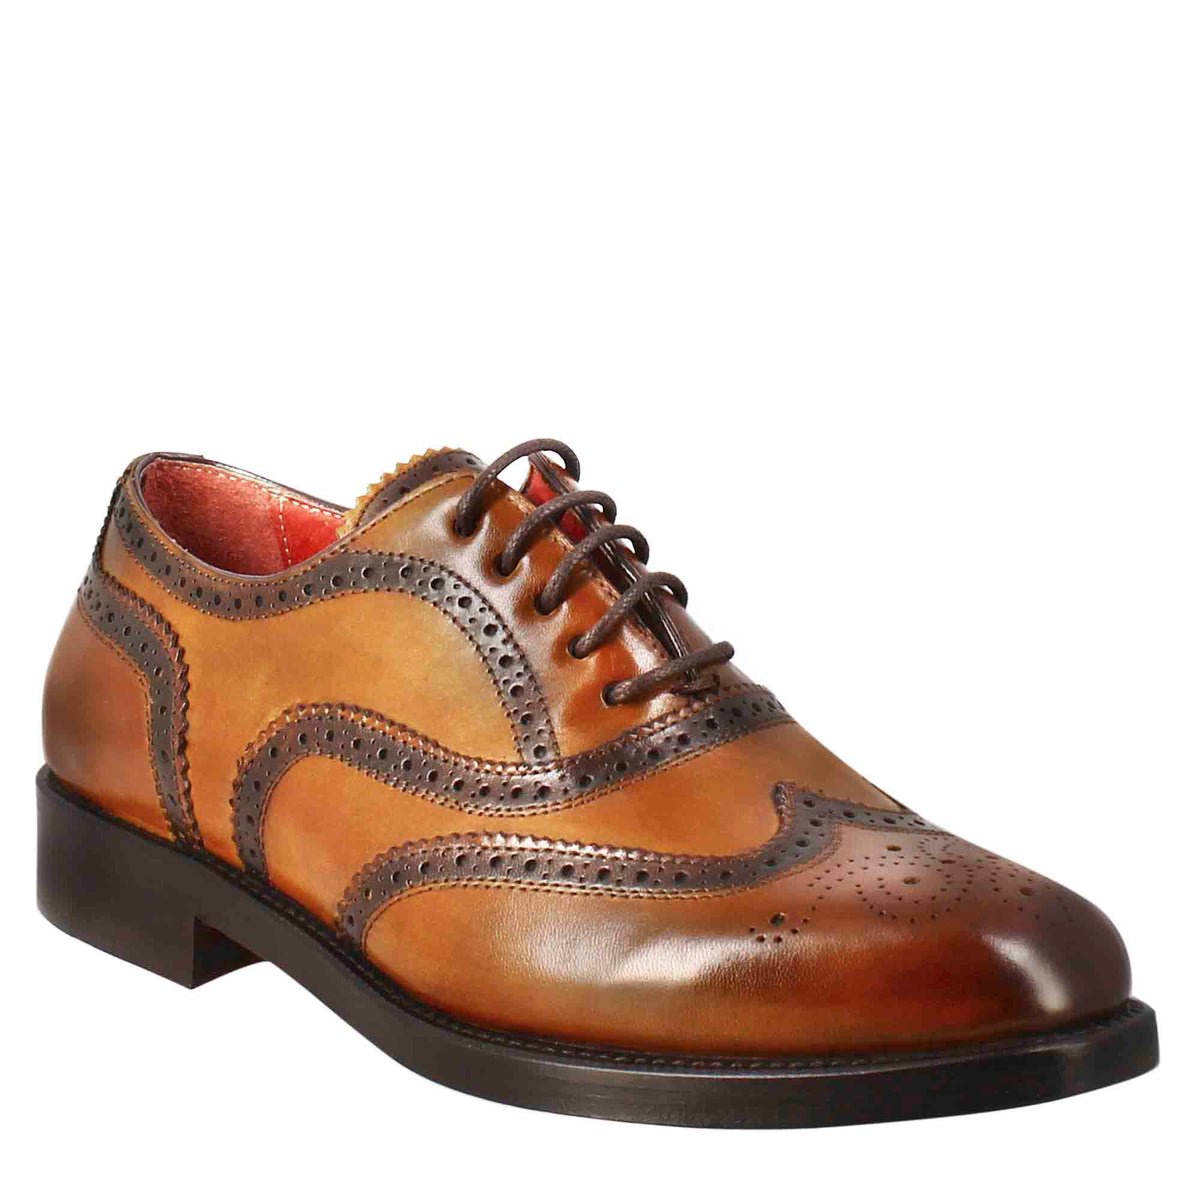 Women's oxfords with brogue effect in light brown leather